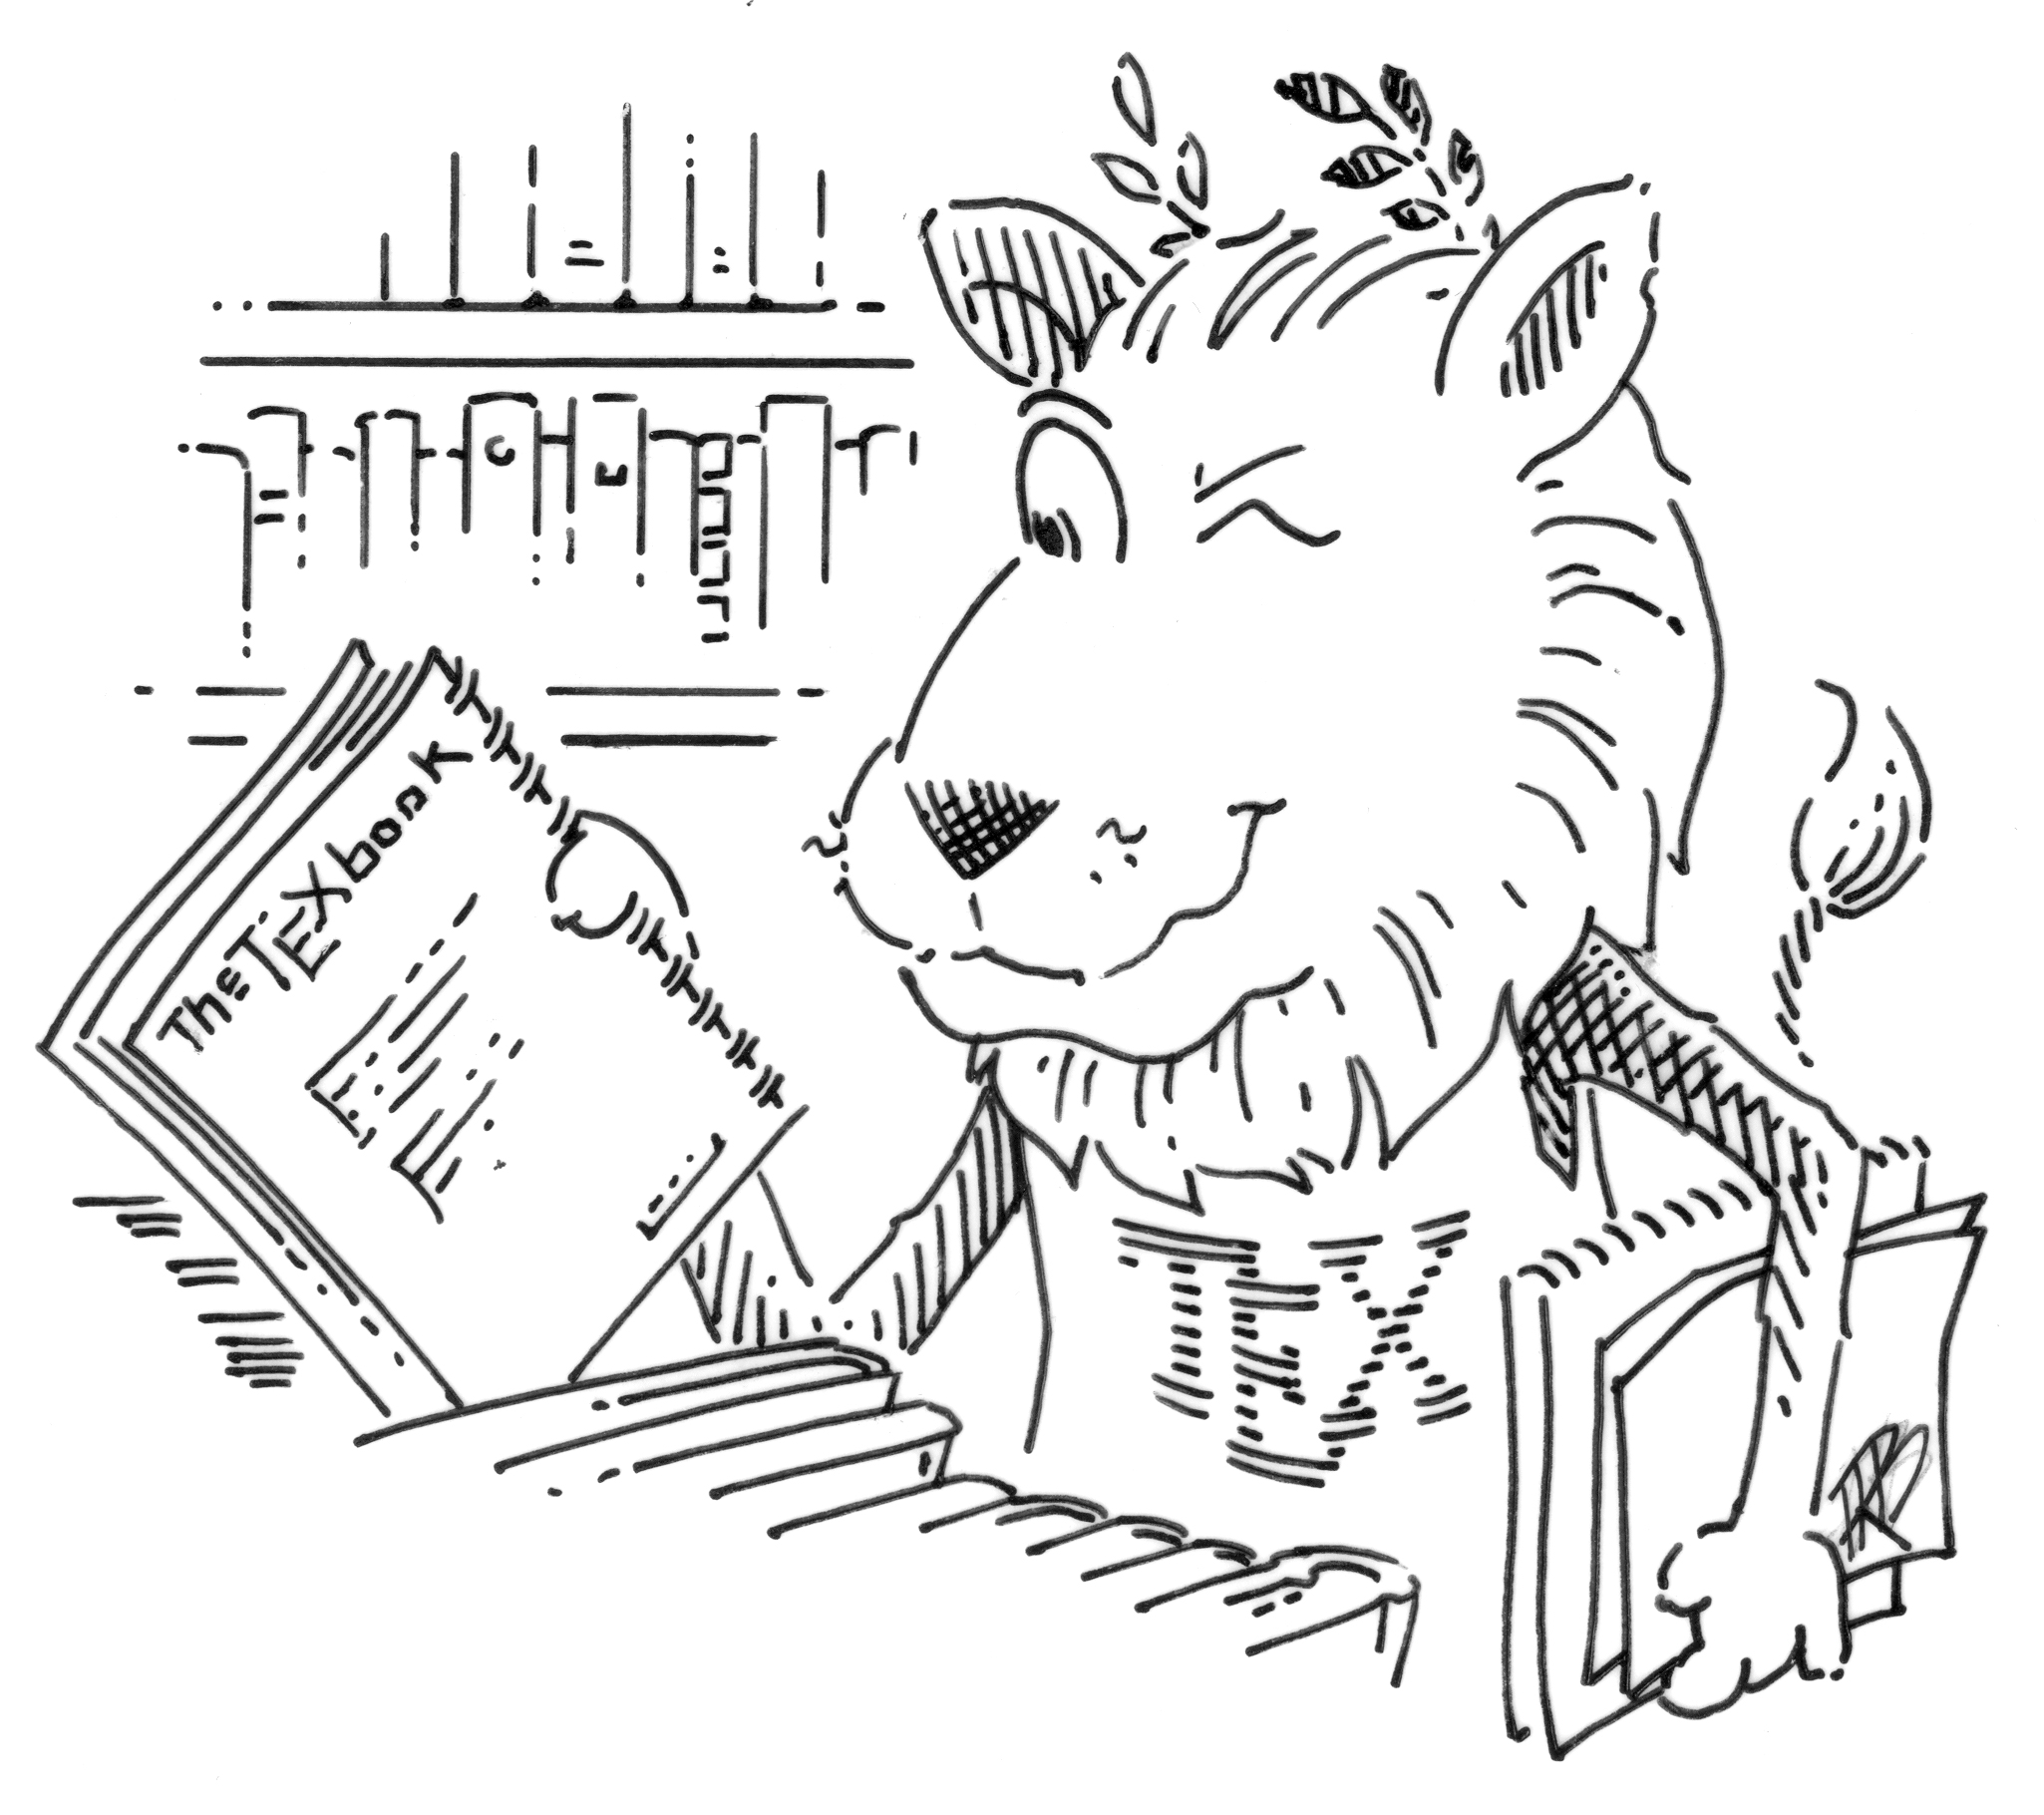 Image of TeX Lion. Click on image to link to page on
	  LaTeX training.